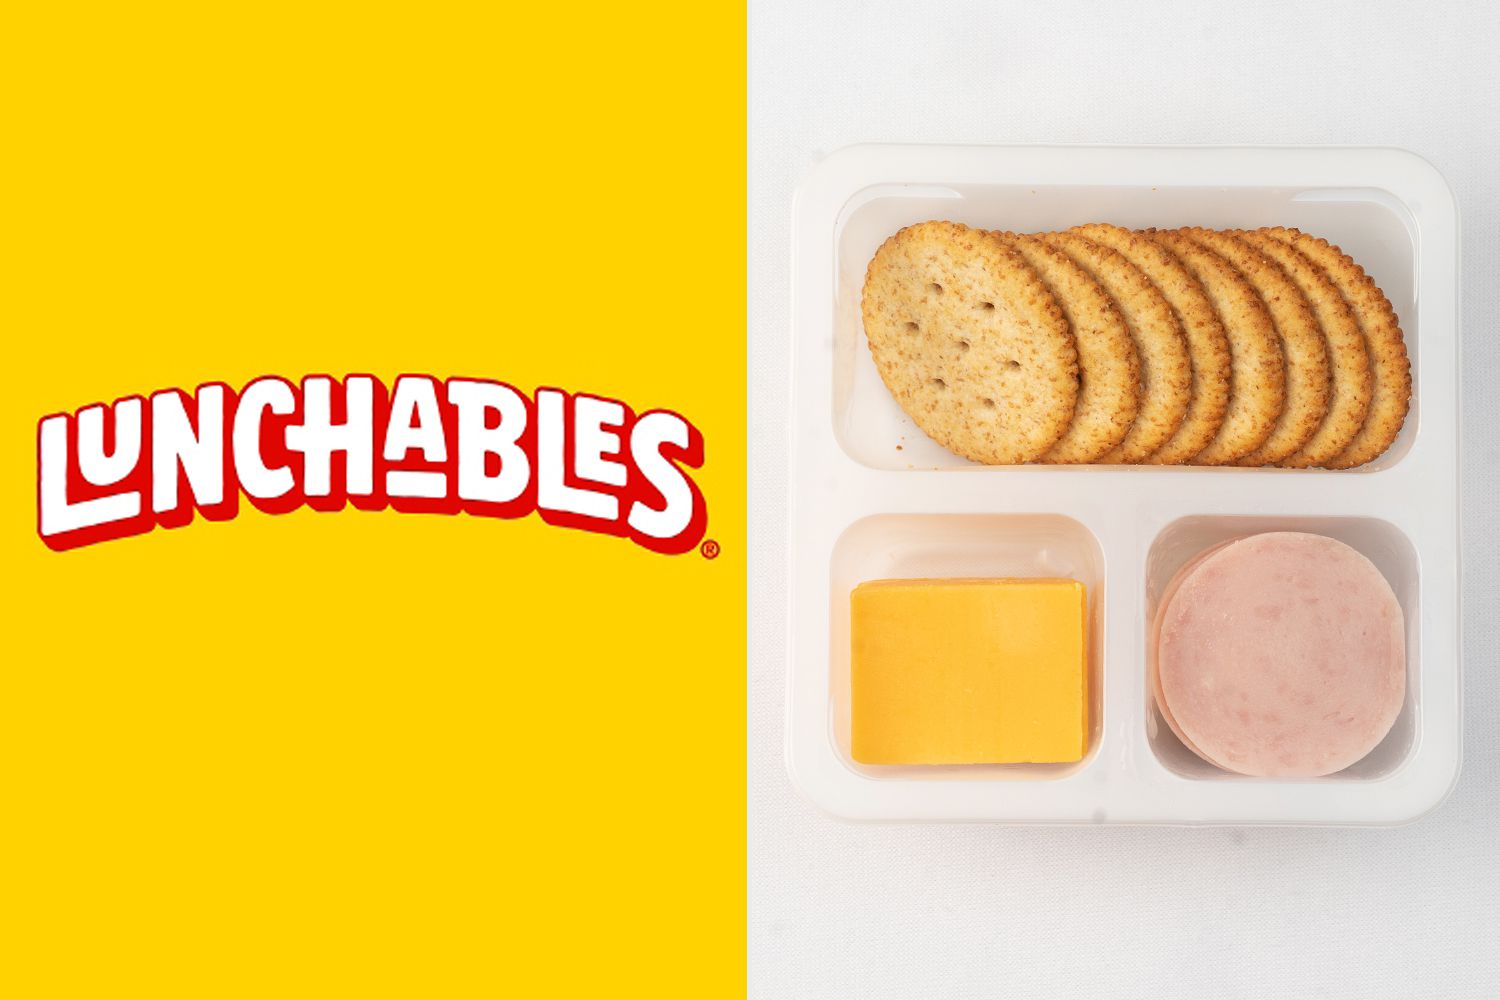 Concerning Levels of Lead and Sodium in Lunchables